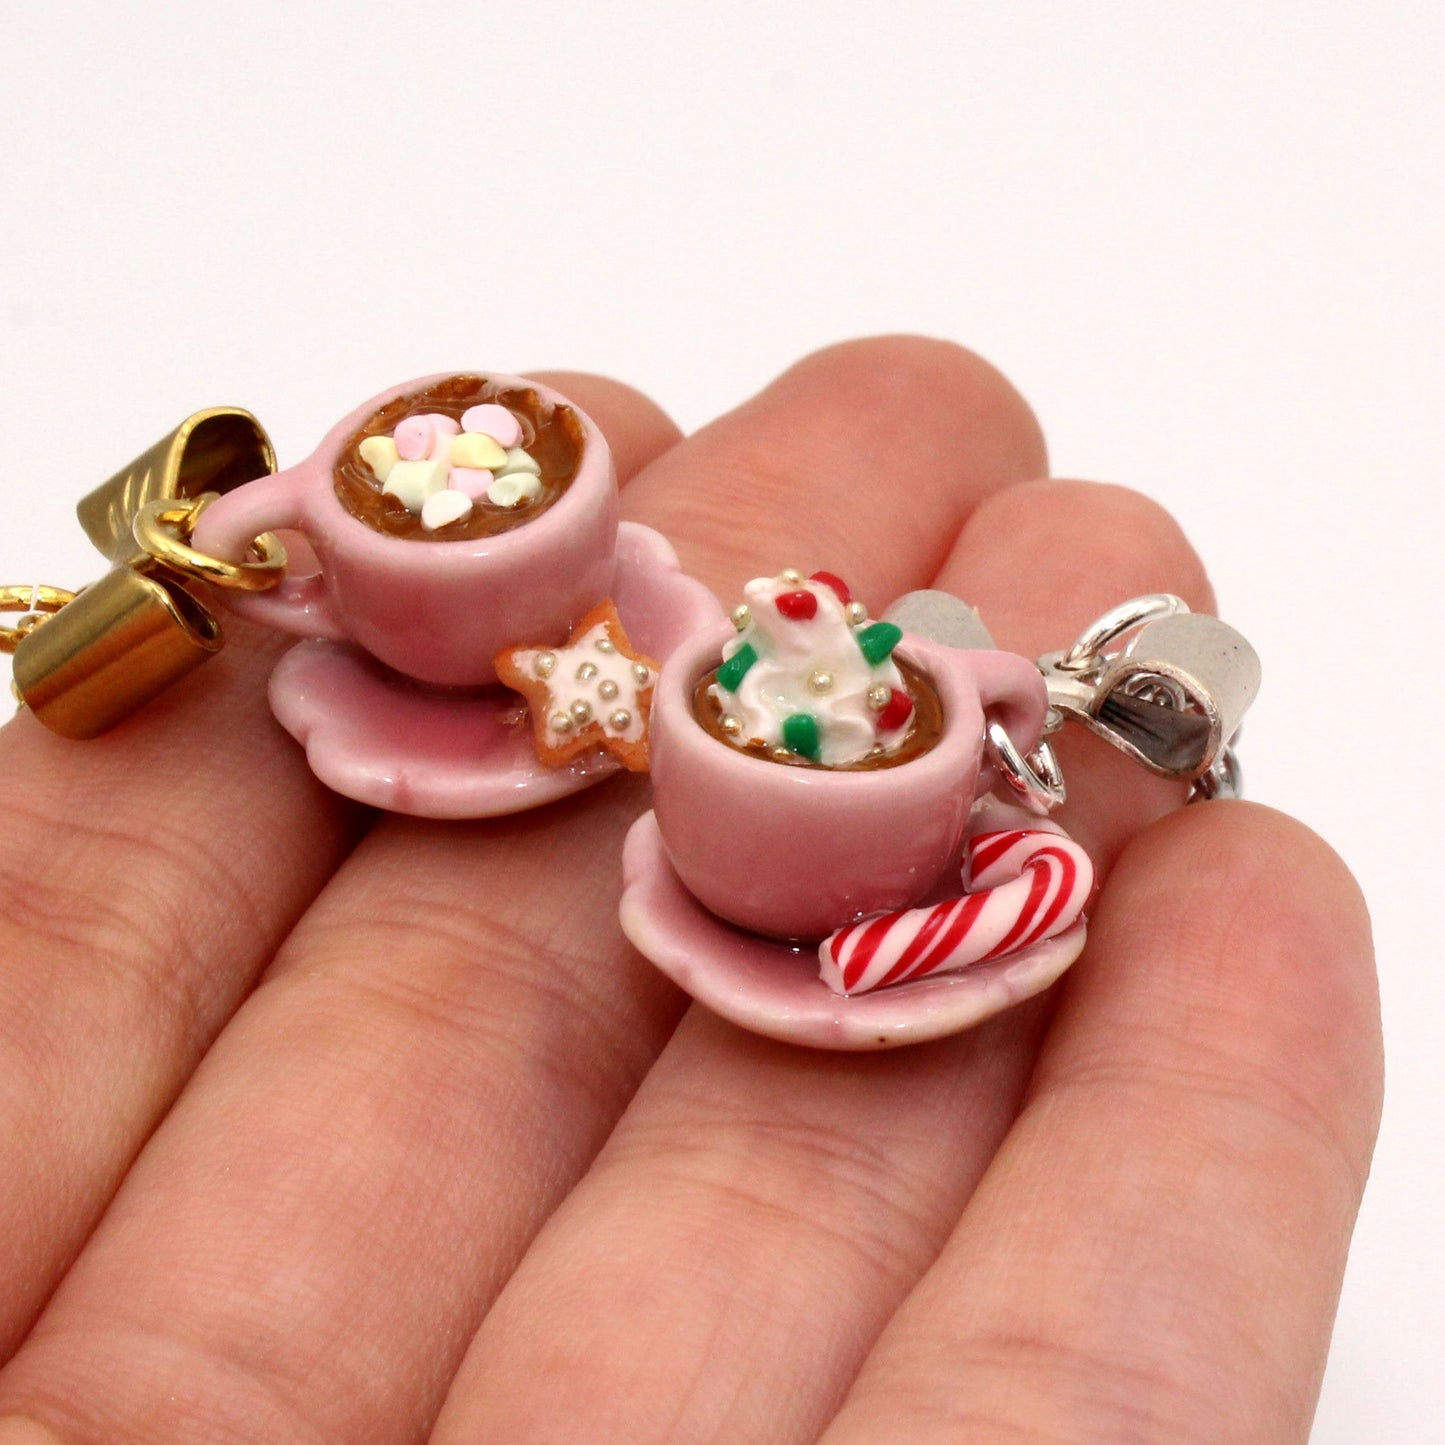 Hot Cocoa Earrings - Limited Edition Holiday Collection